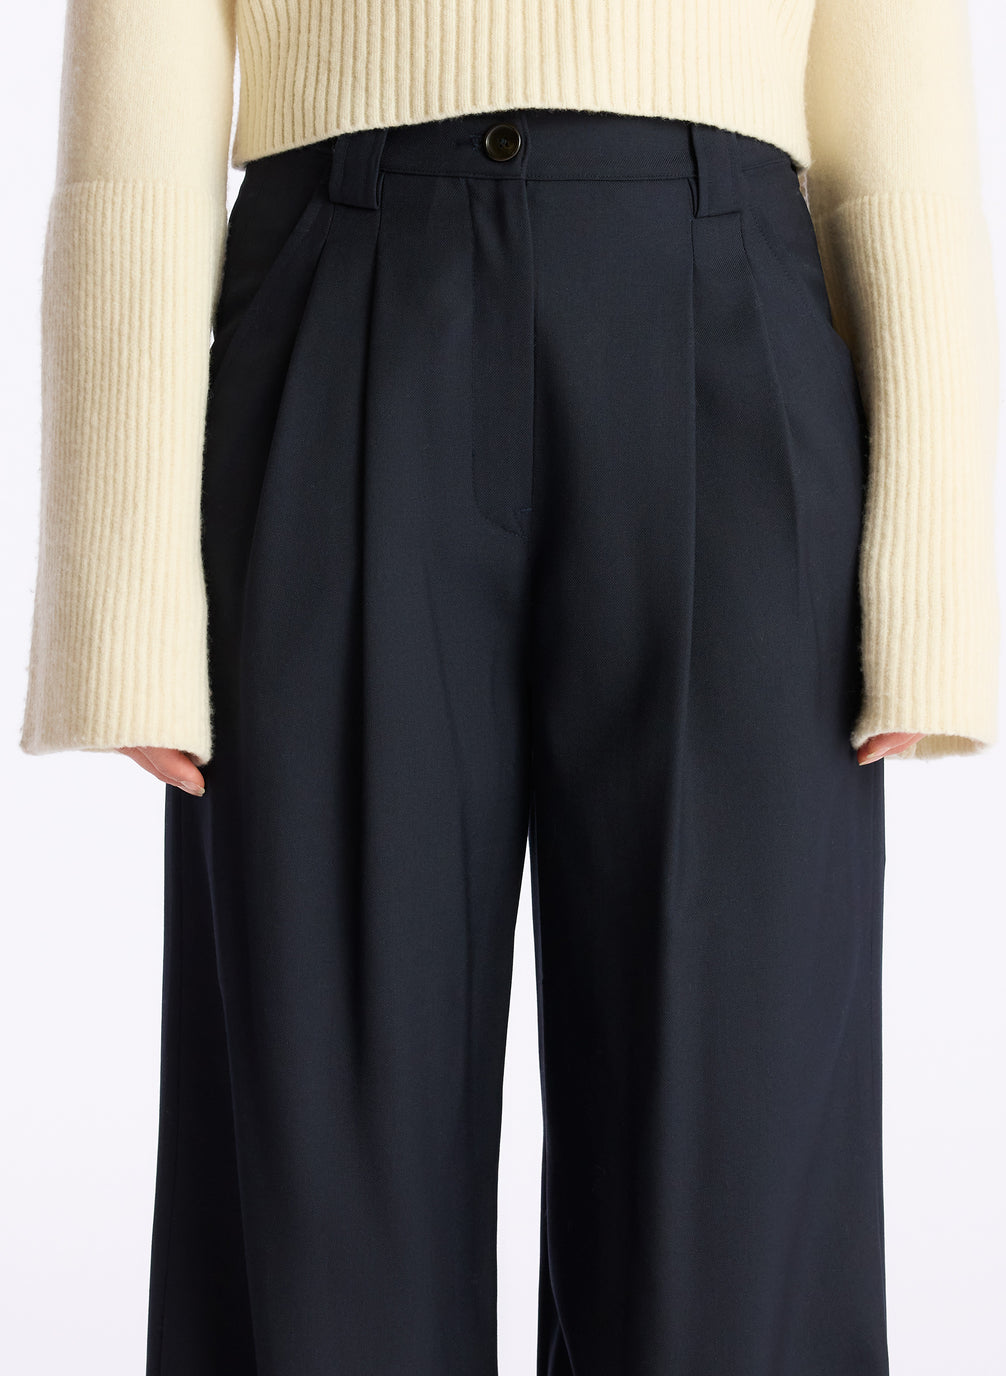 detail  view of a woman wearing a cream sweater and navy wide leg pants